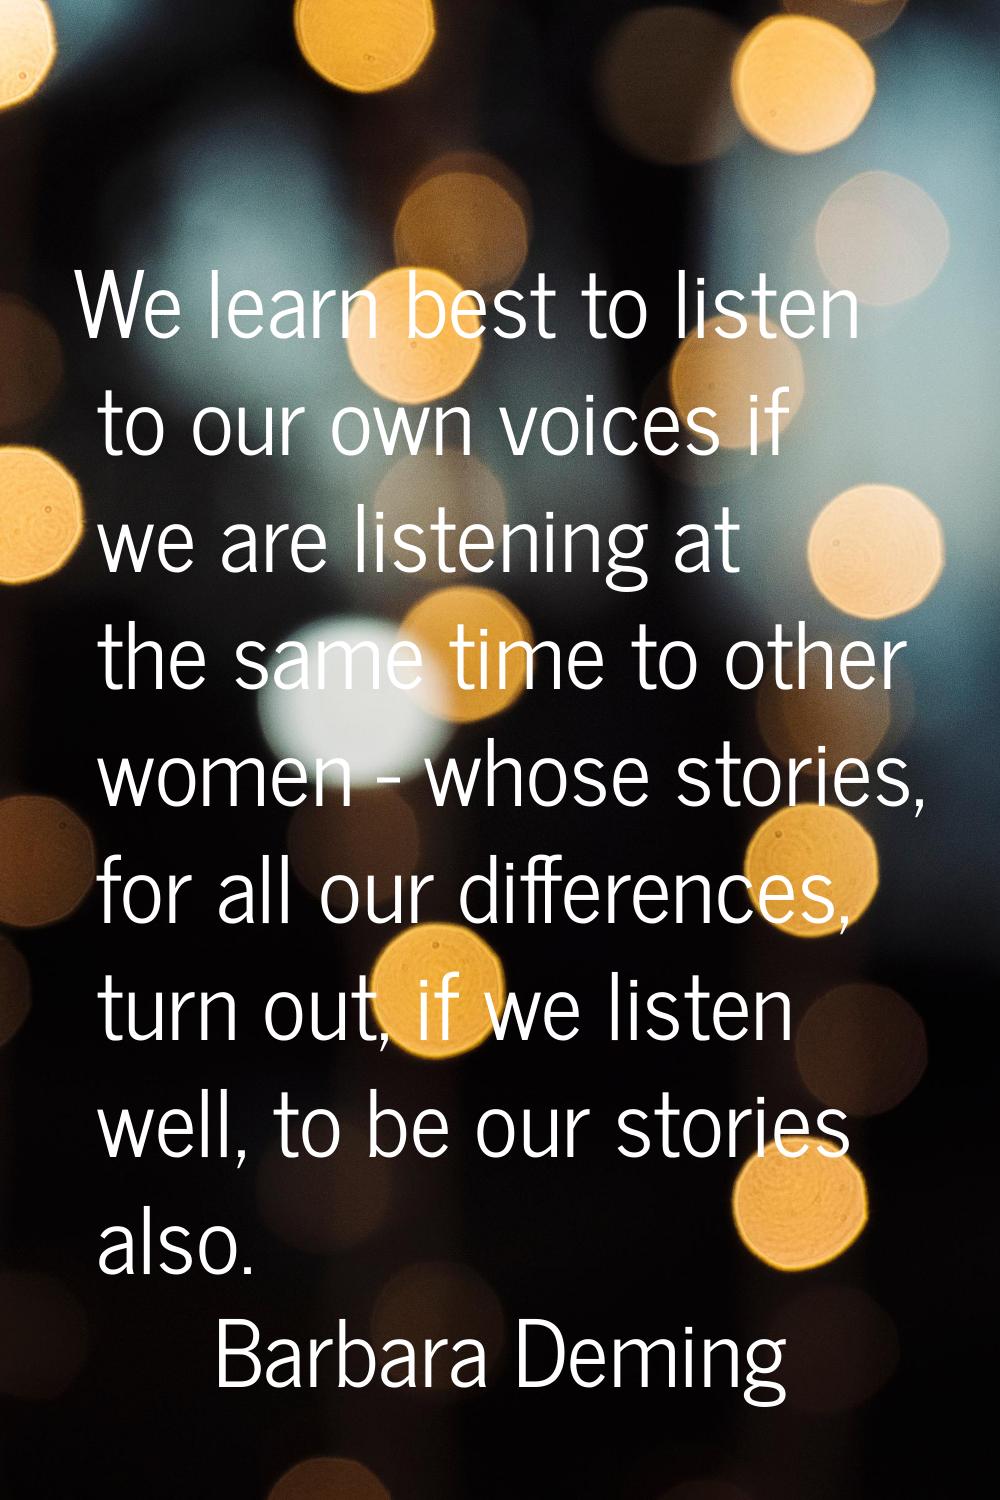 We learn best to listen to our own voices if we are listening at the same time to other women - who